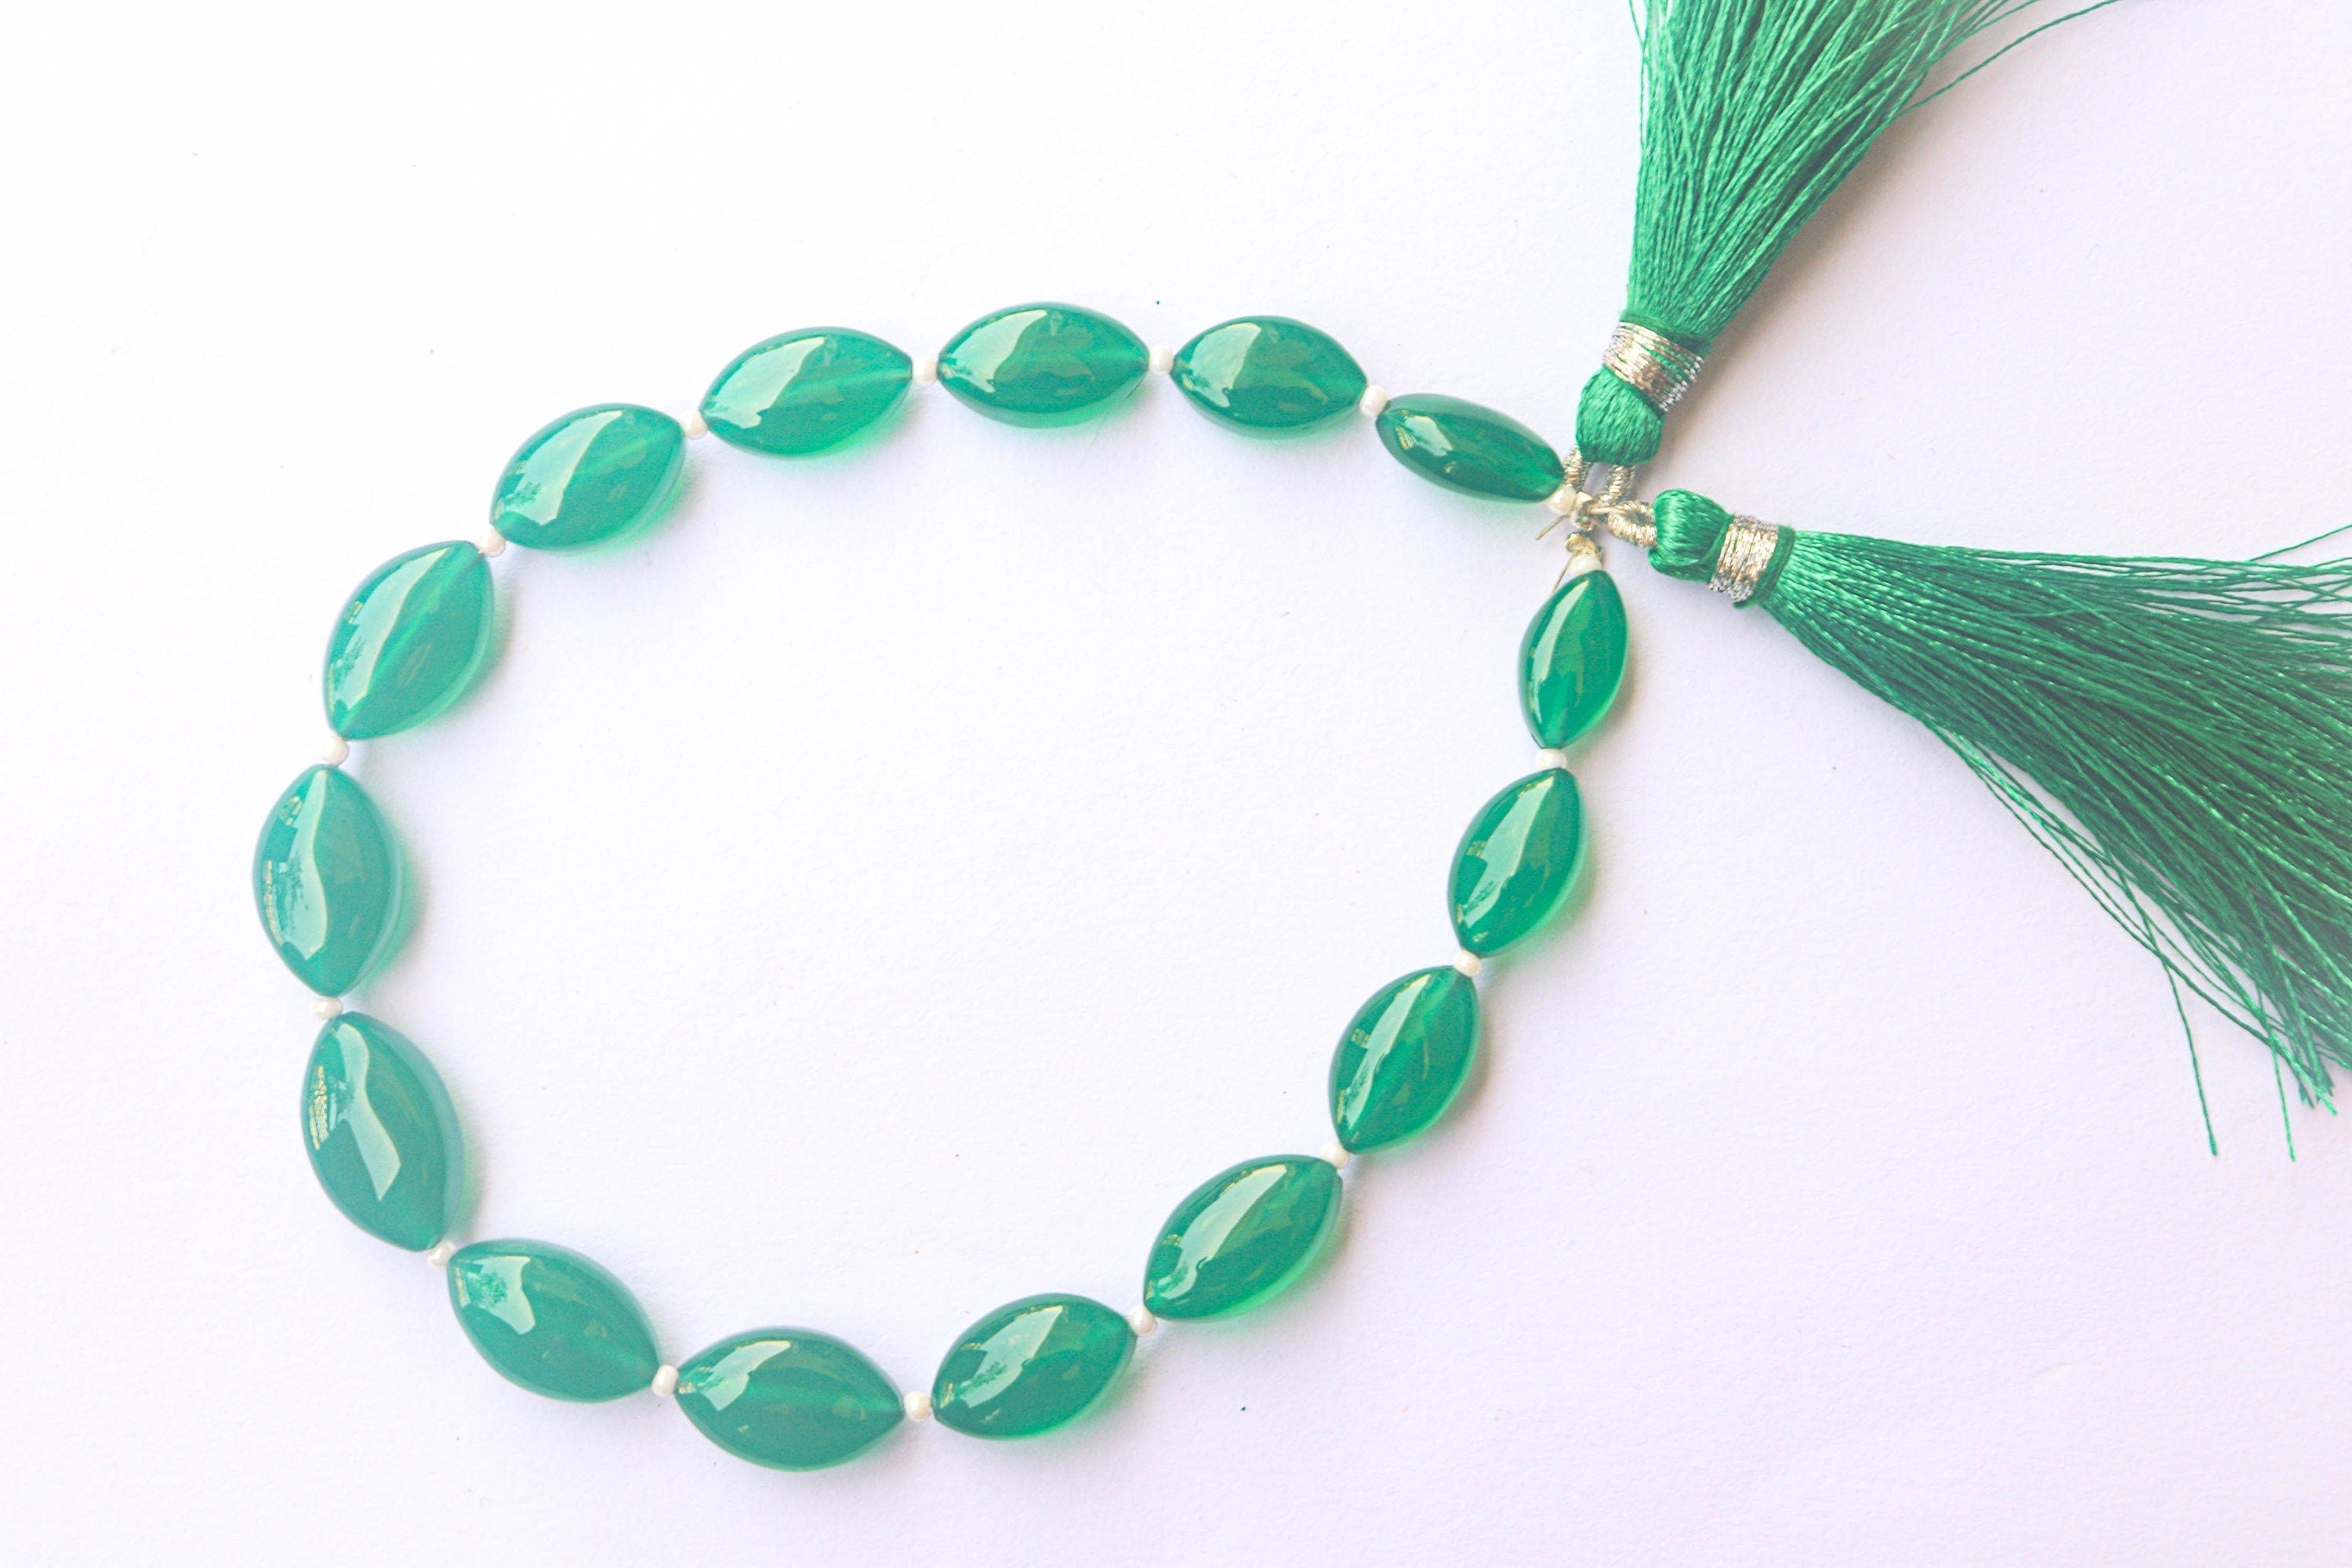 Green Onyx Marquise Shape Beads | 7x12mm to 10x16mm | 15 Pieces | 9 inch String | Gemstone Beads for Jewelry making | Beadsforyourjewelry